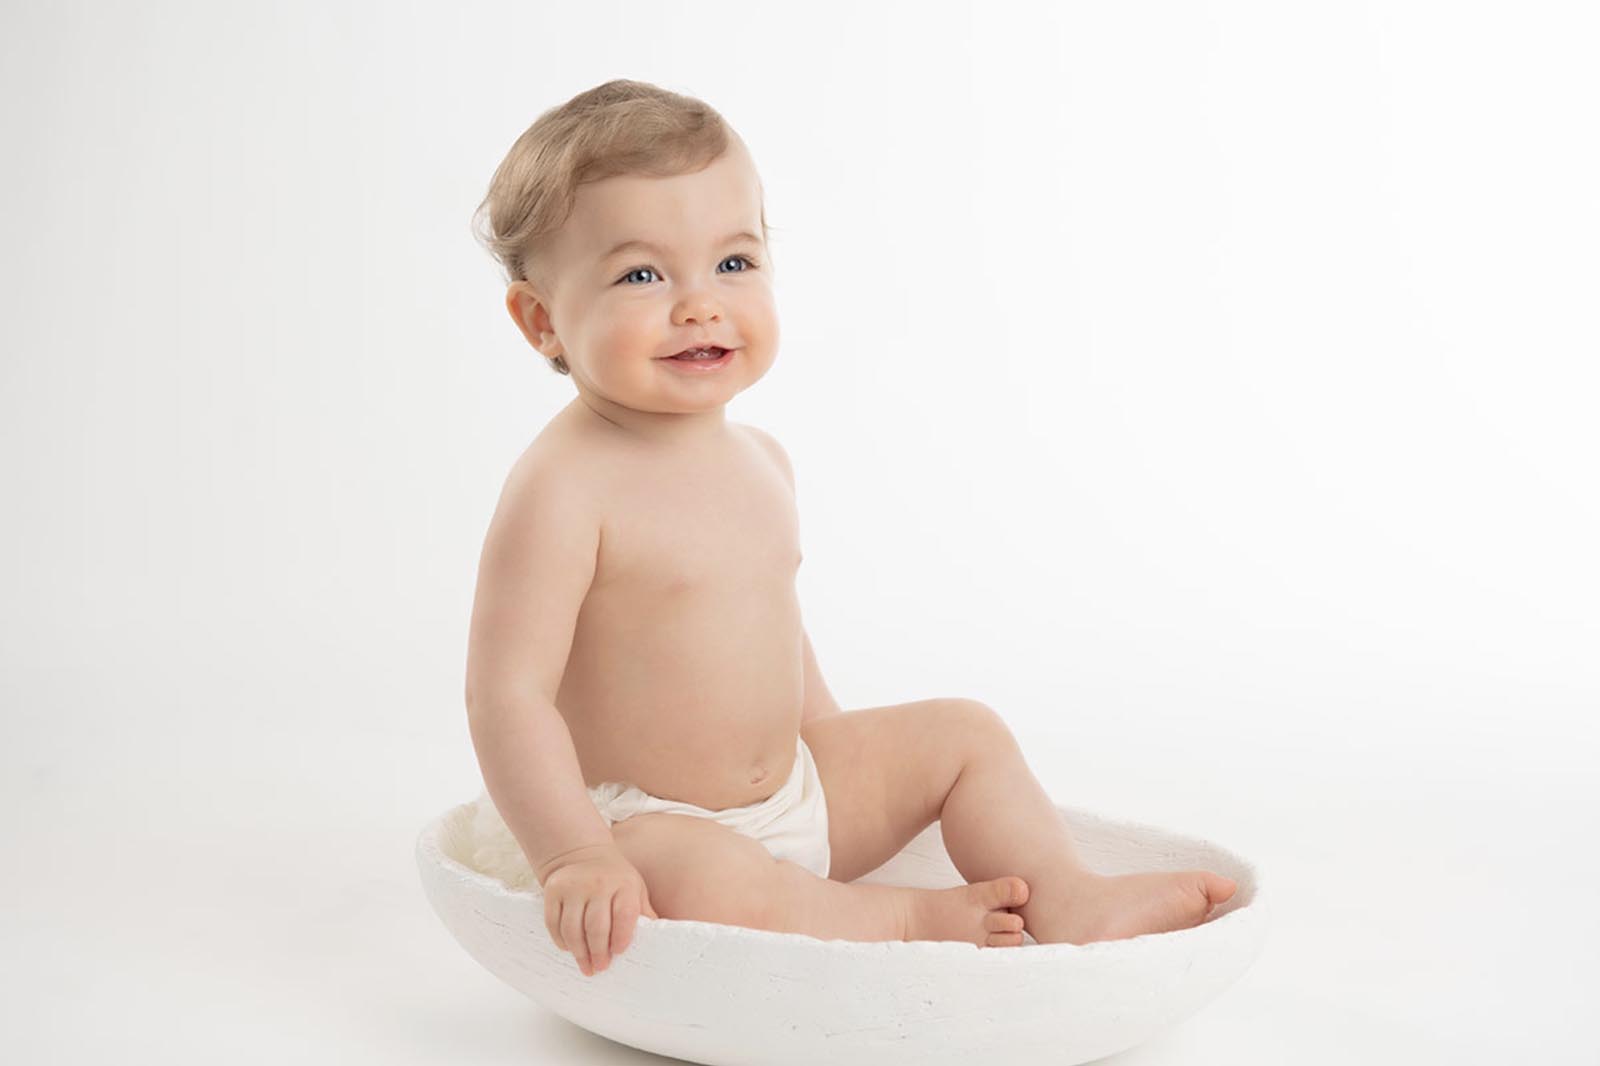 Baby smiling happily at a photo studio